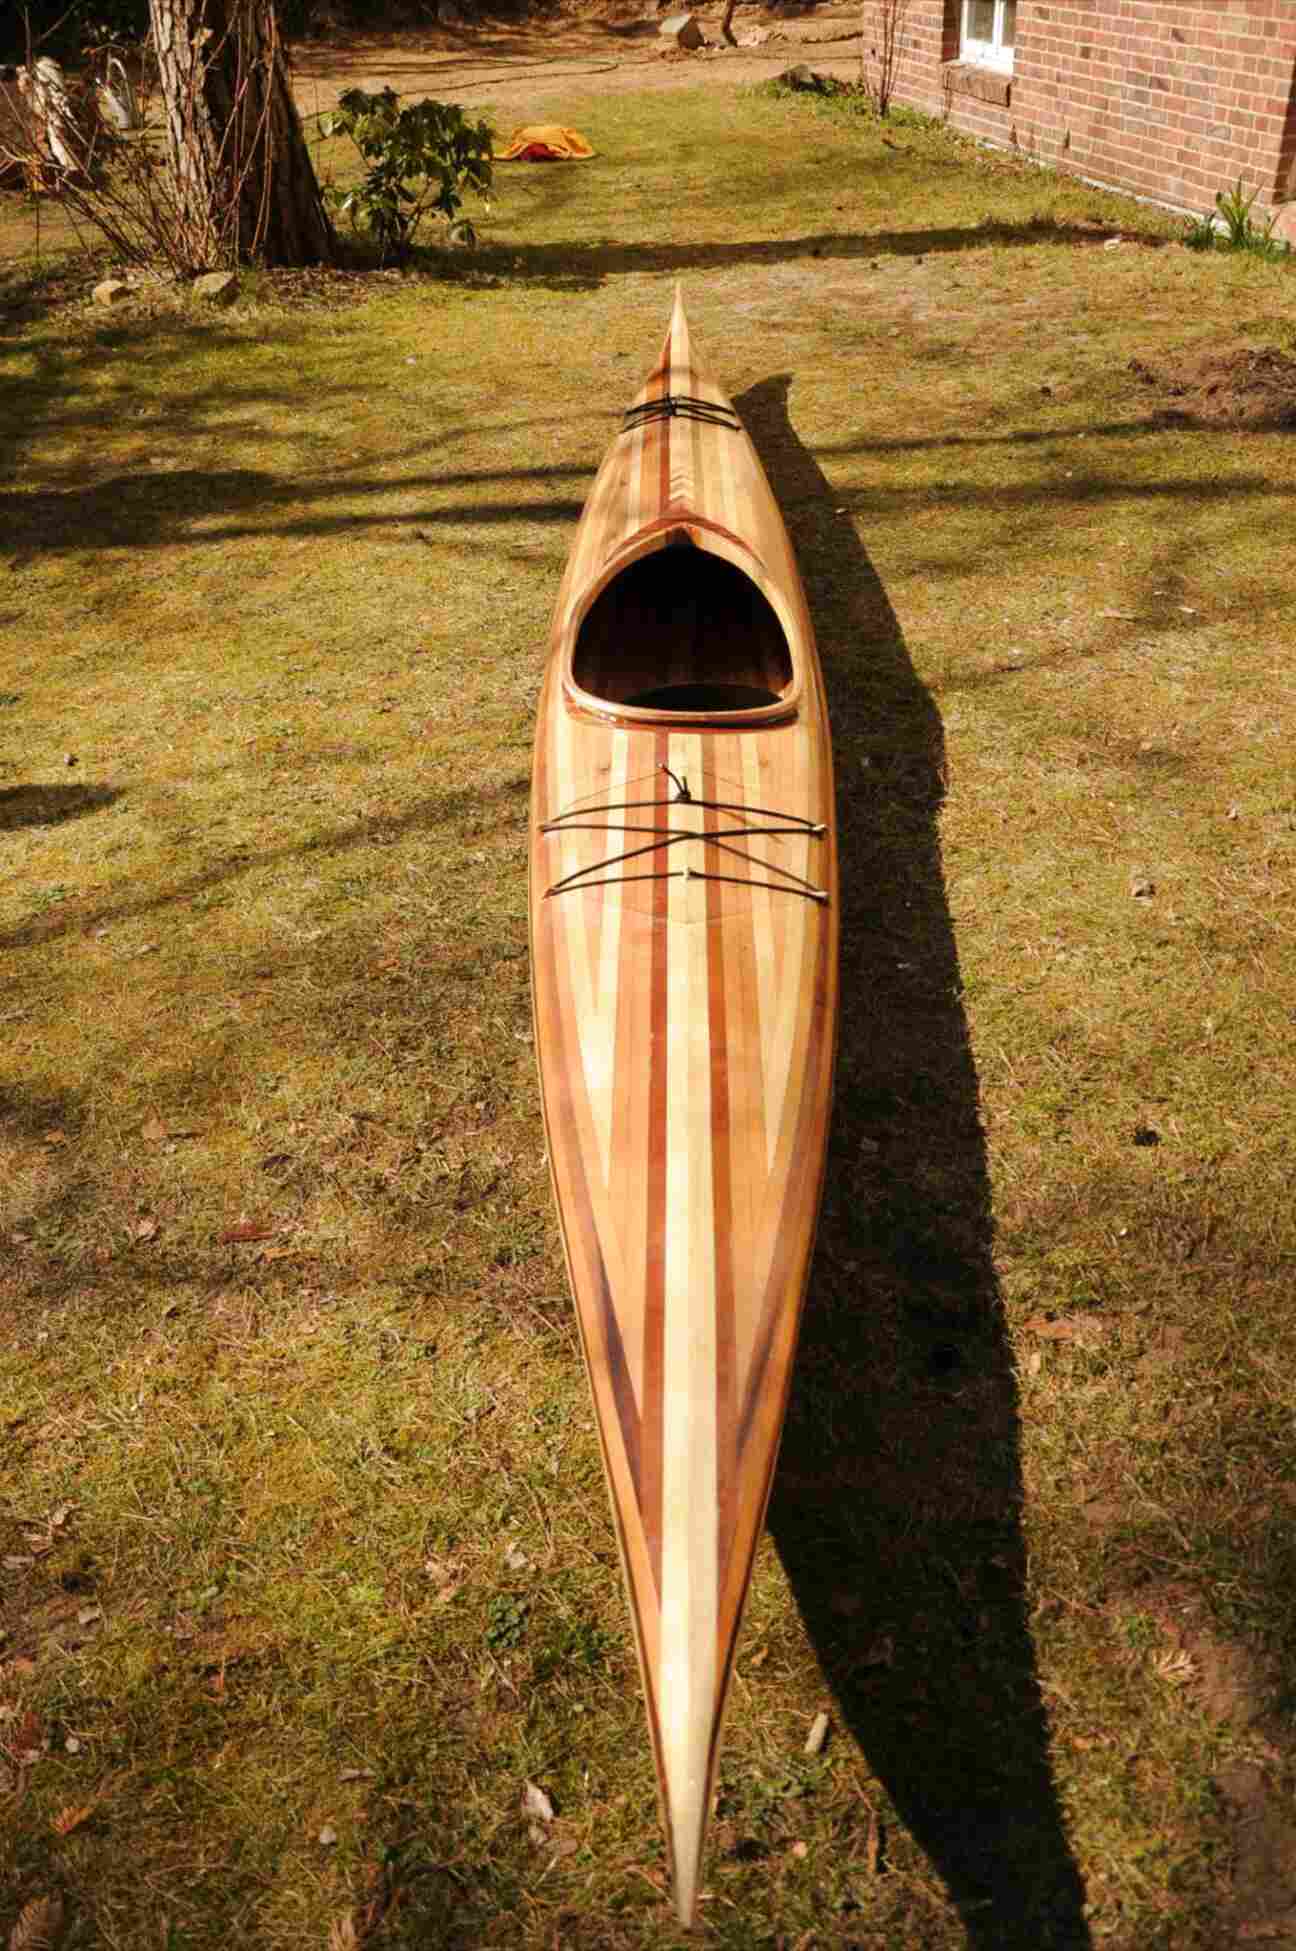 Wooden Kayak for sale in UK 51 used Wooden Kayaks